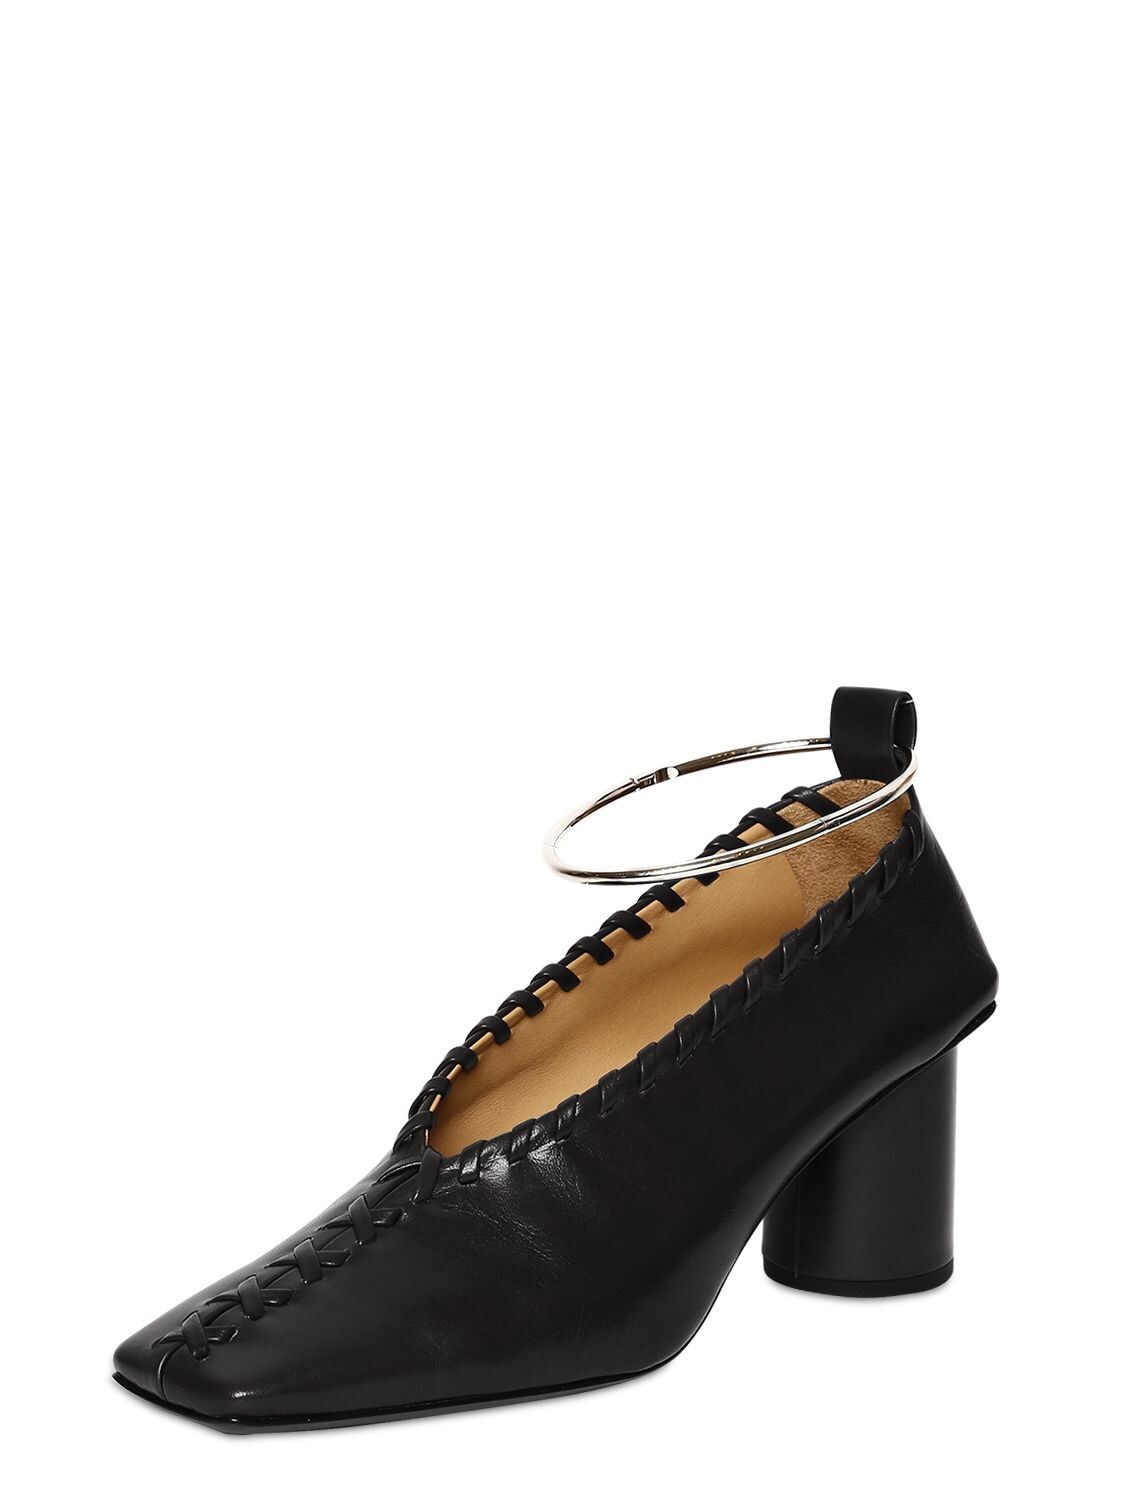 Jil Sander Whipstitched Square-toe Leather Pumps In 001 Black | ModeSens